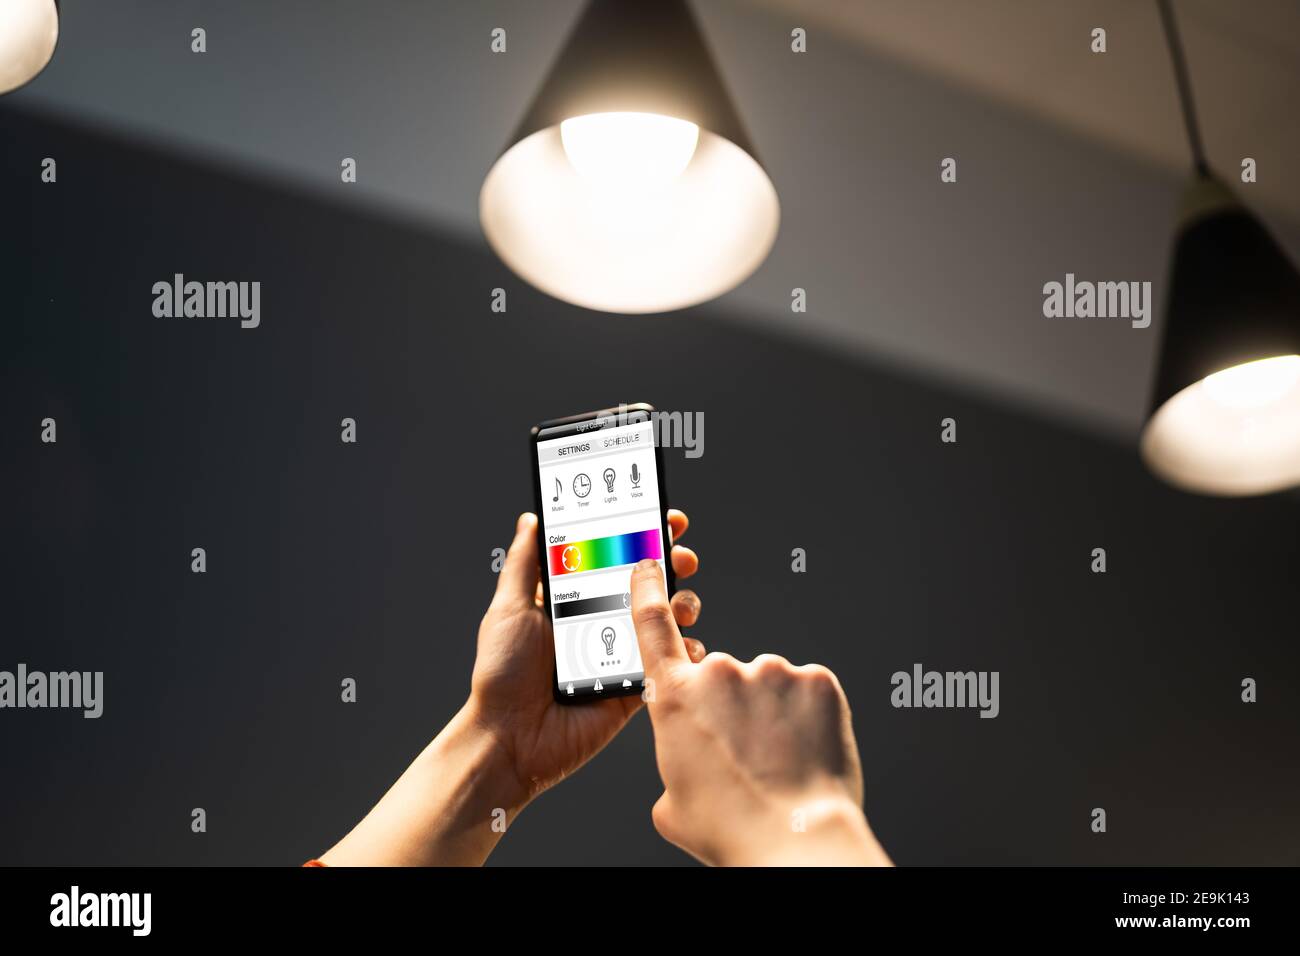 Smart Light Control At House Using Phone Stock Photo